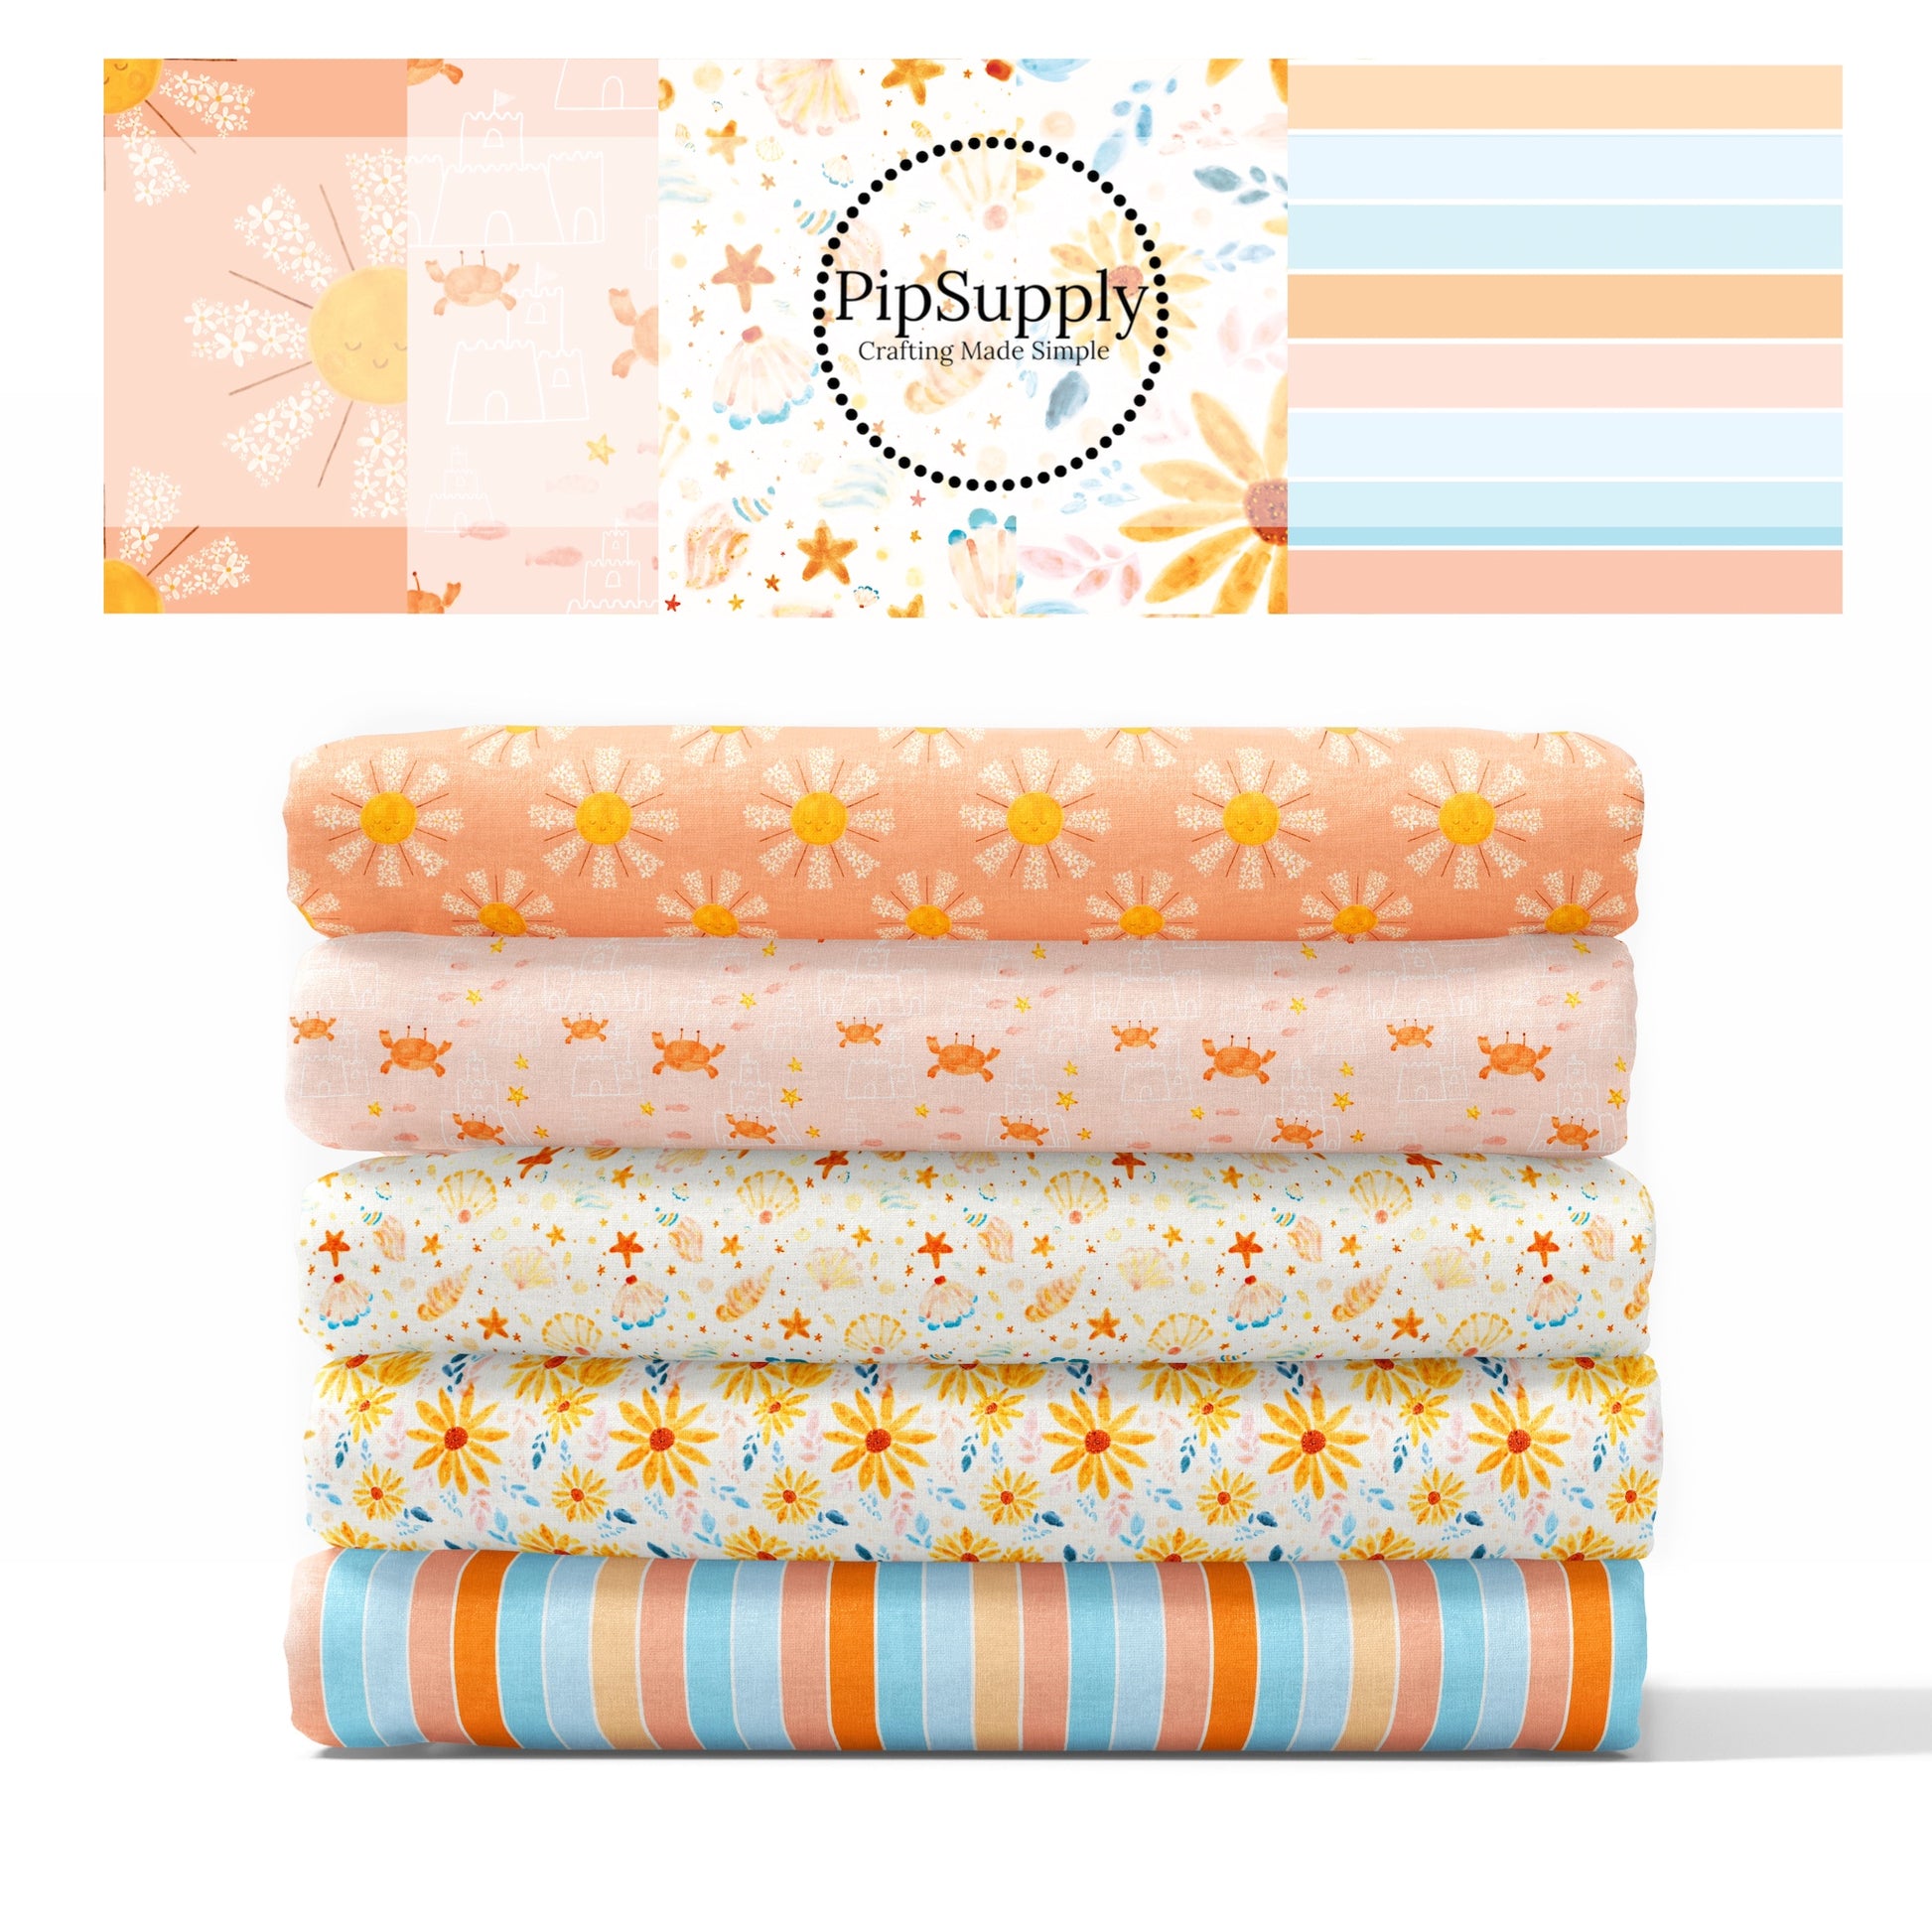 Summer themed high quality fabric adaptable for all your crafting needs. Make cute baby headwraps, fun girl hairbows, knotted headbands for adults or kids, clothing, and more!